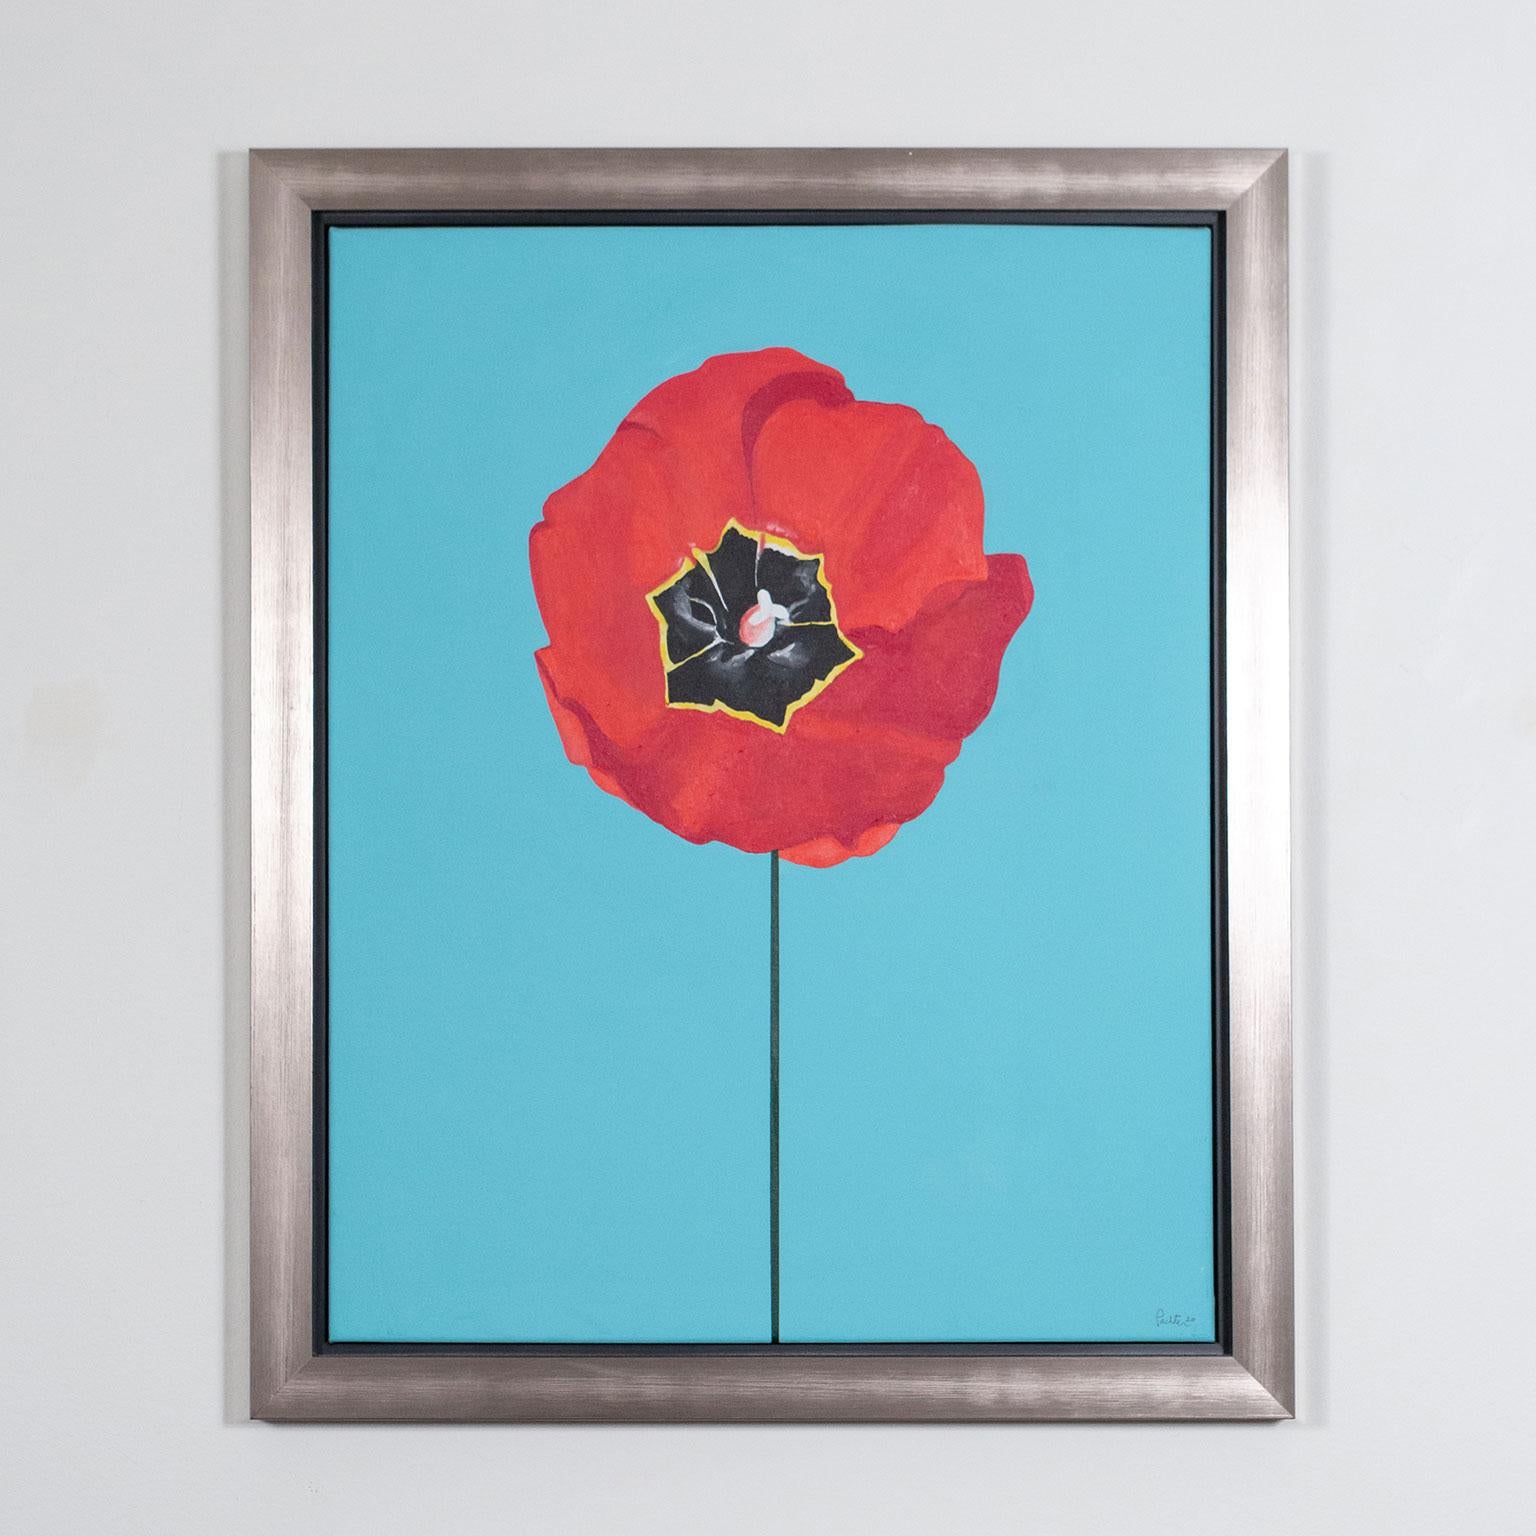 Tulip - Painting by Charles Pachter